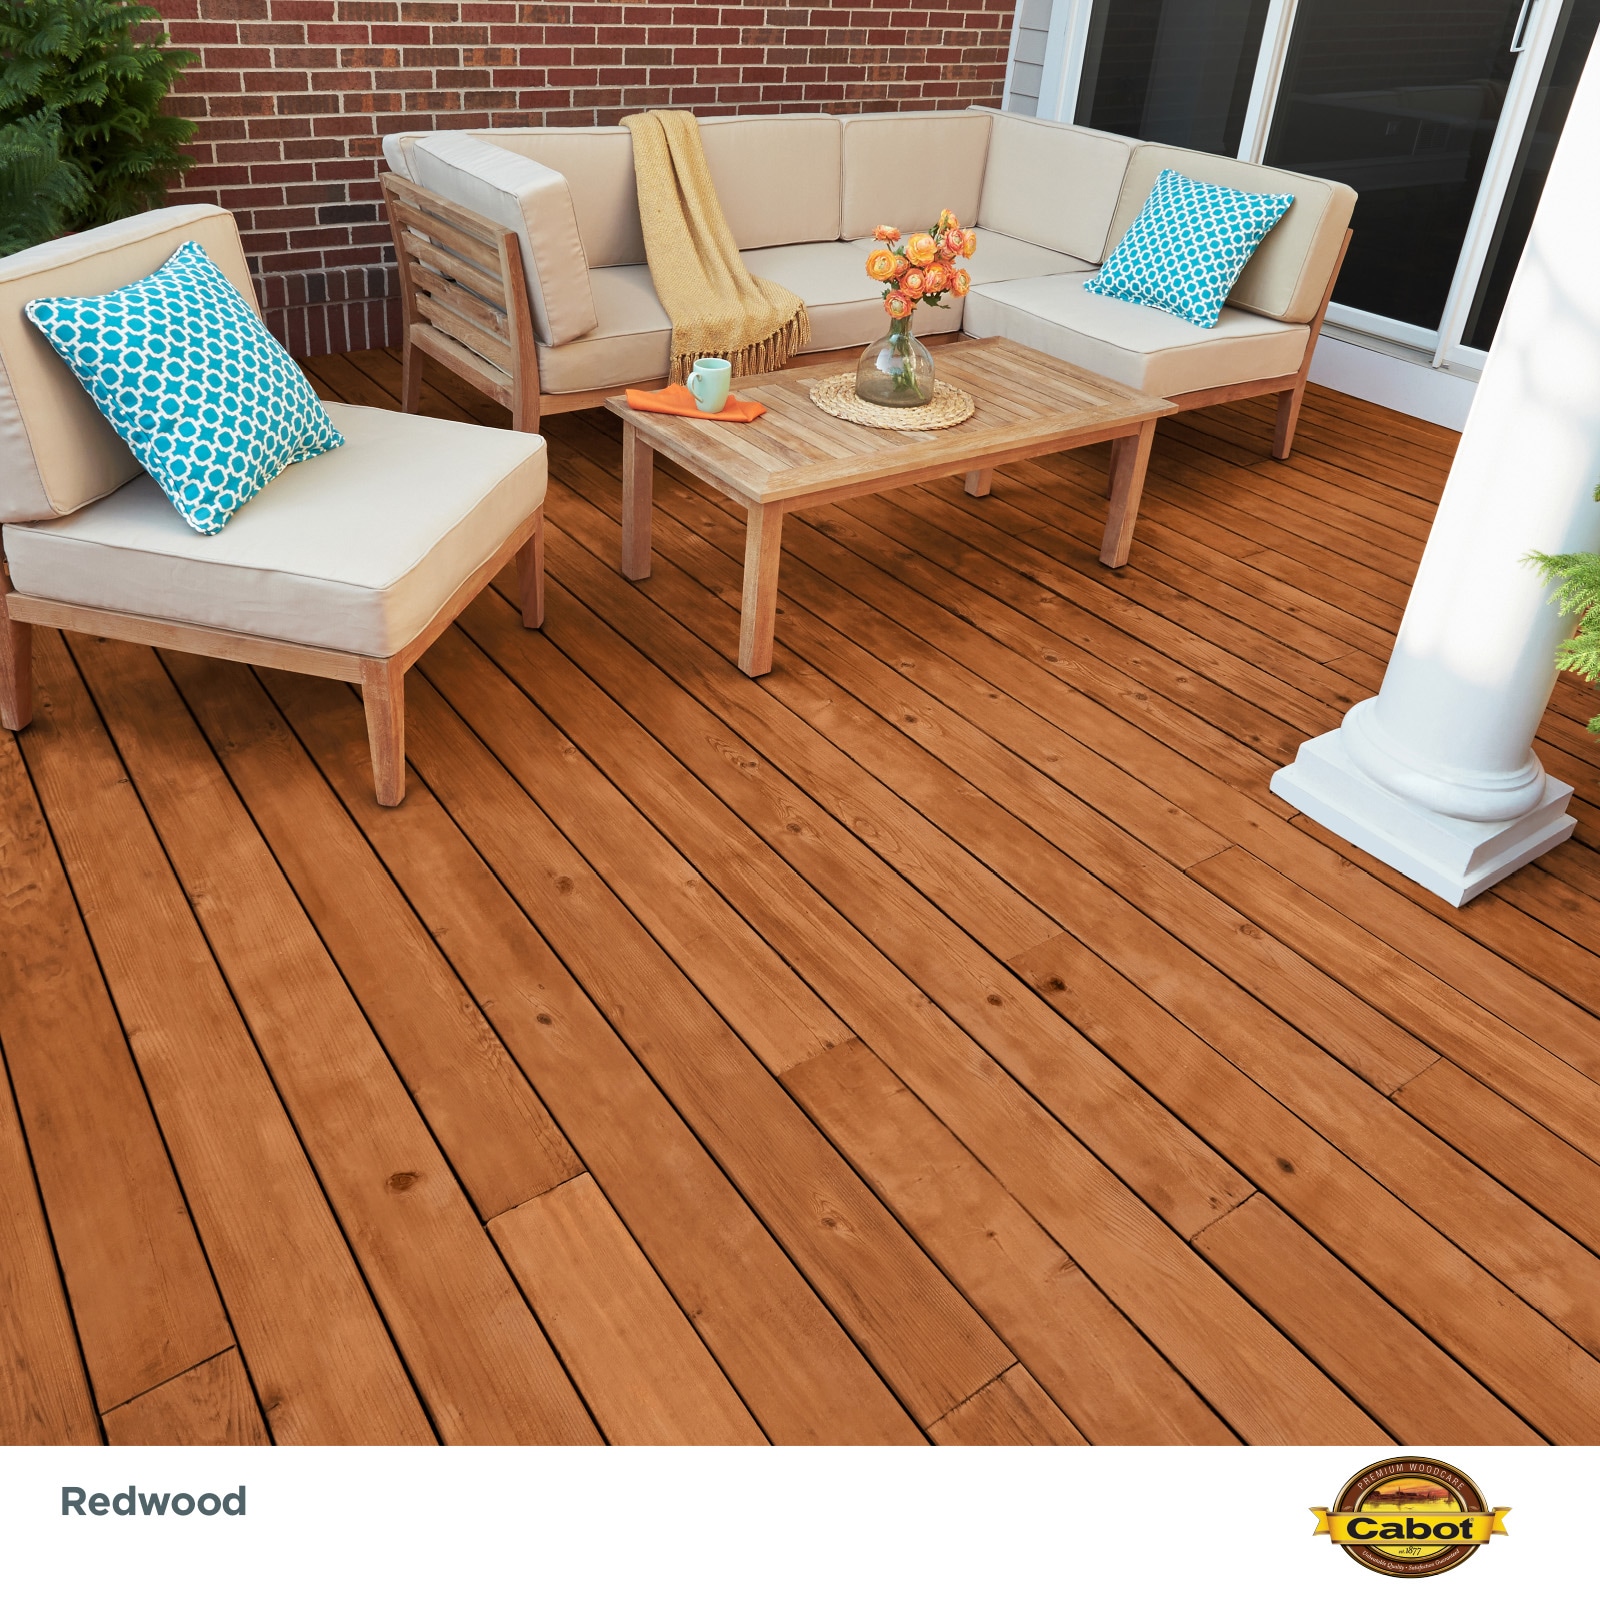 Cabot Redwood Semi-transparent Exterior Wood Stain and Sealer 